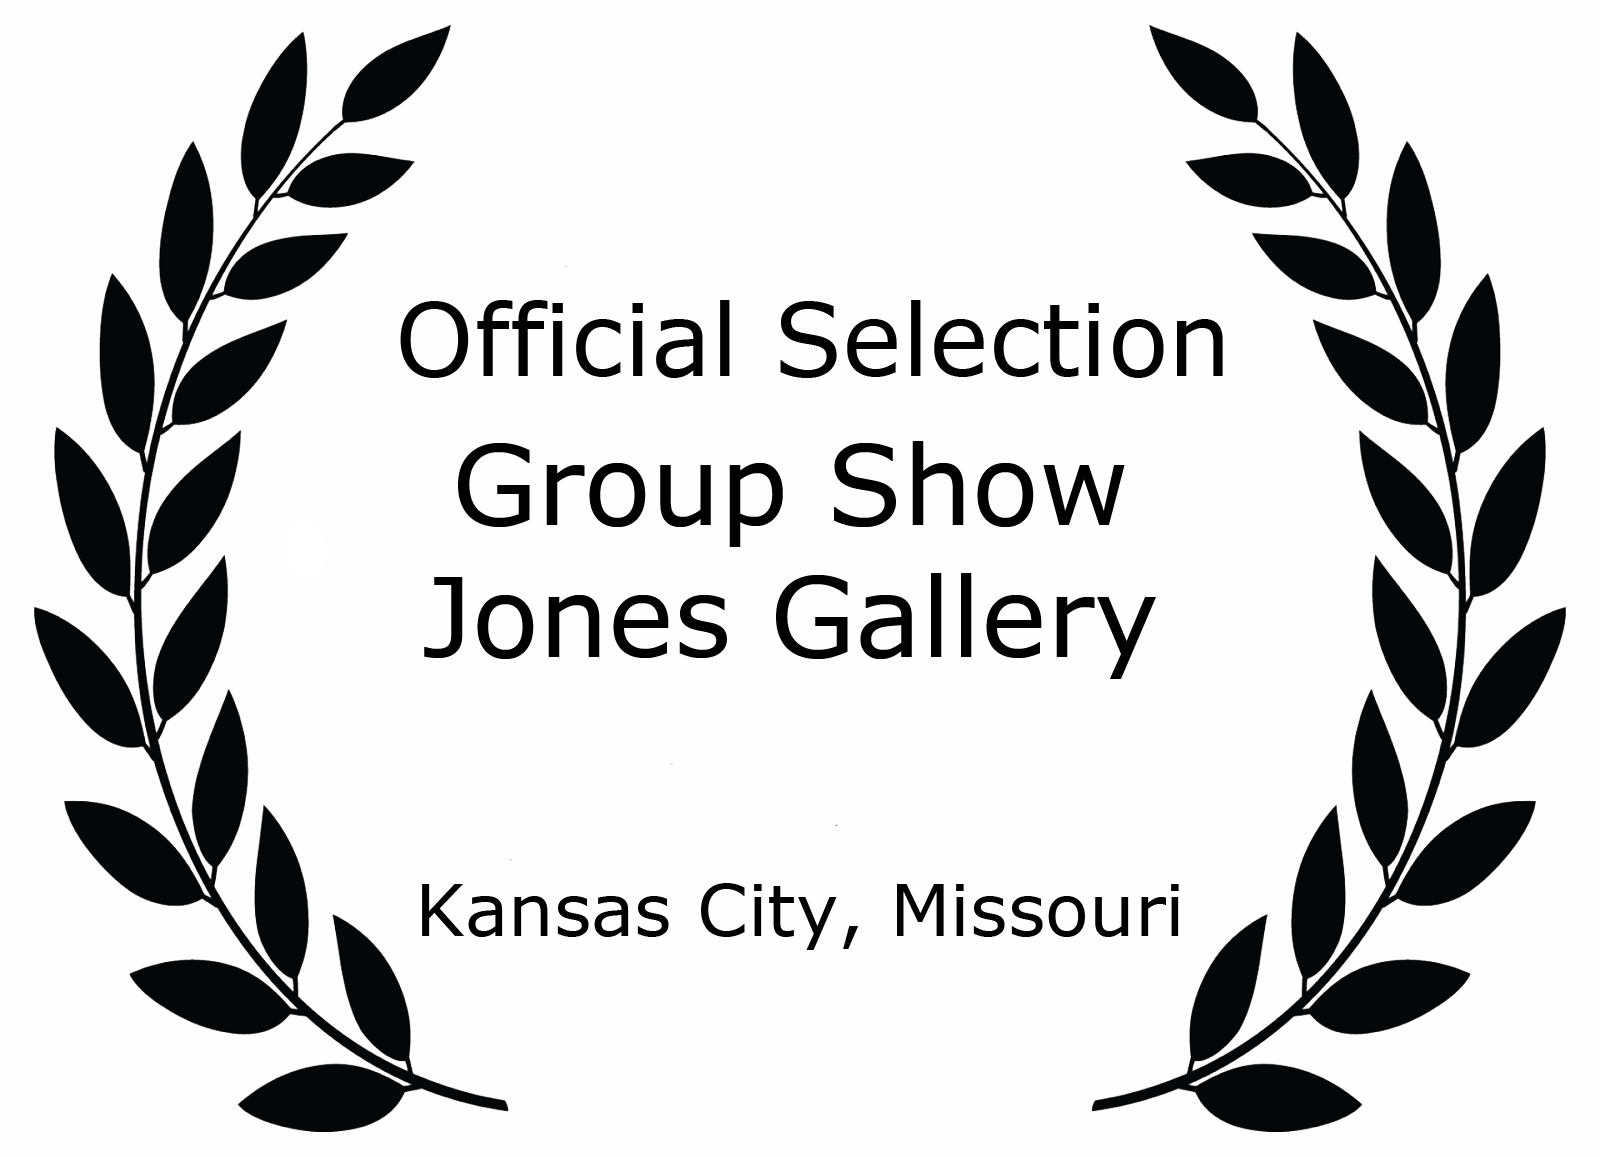 Official Selection Jones Gallery Group Show